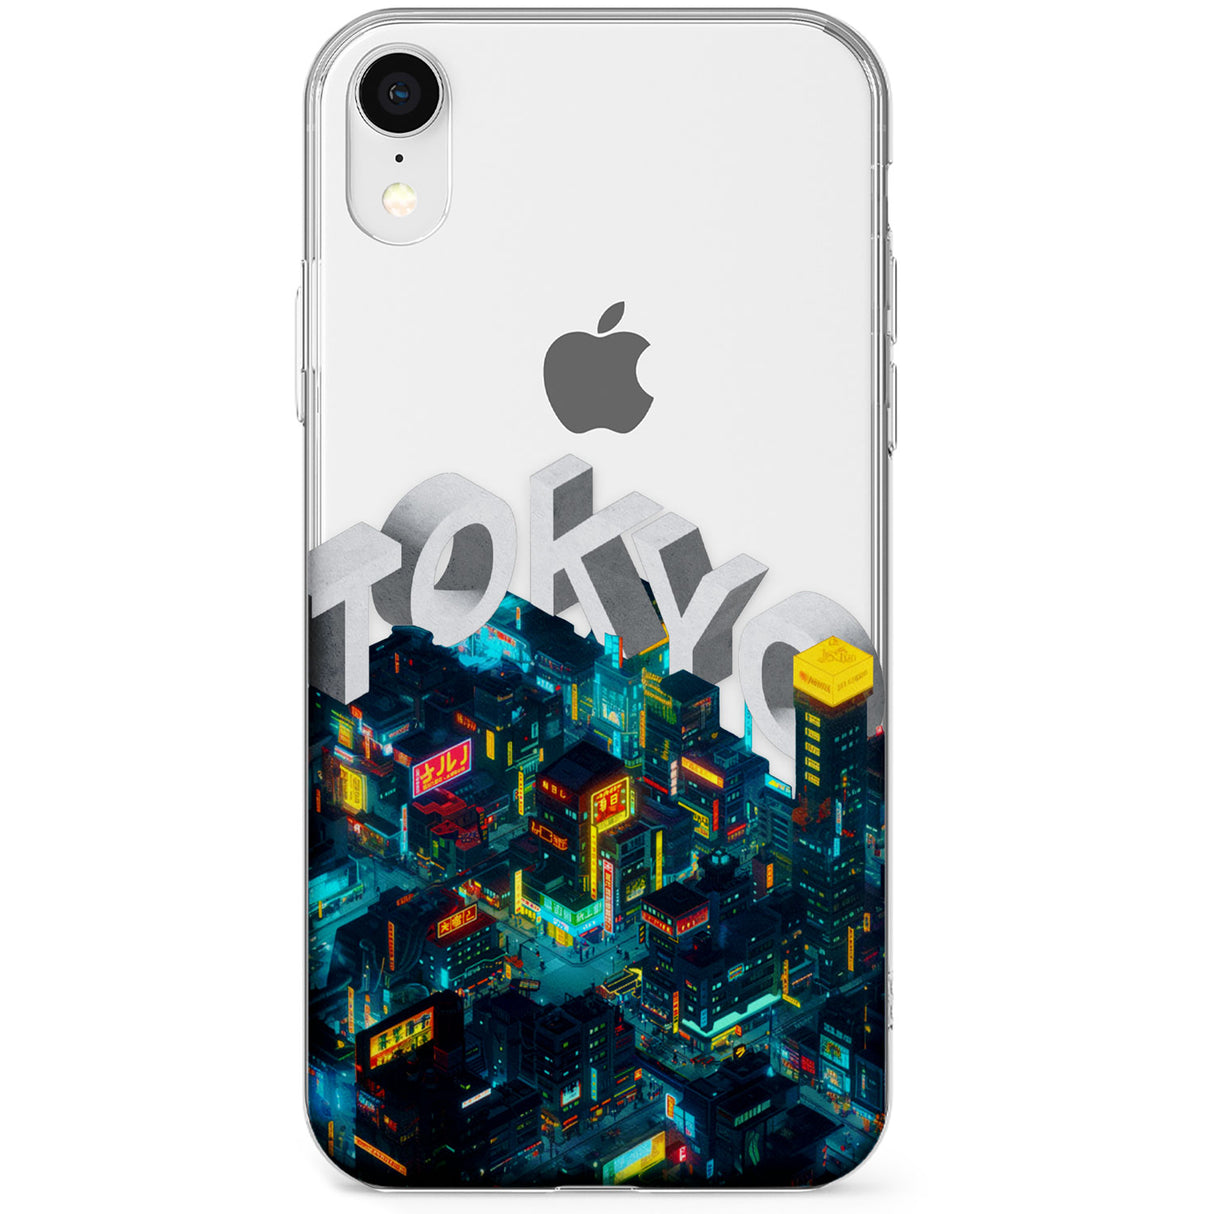 Tokyo Phone Case for iPhone X, XS Max, XR